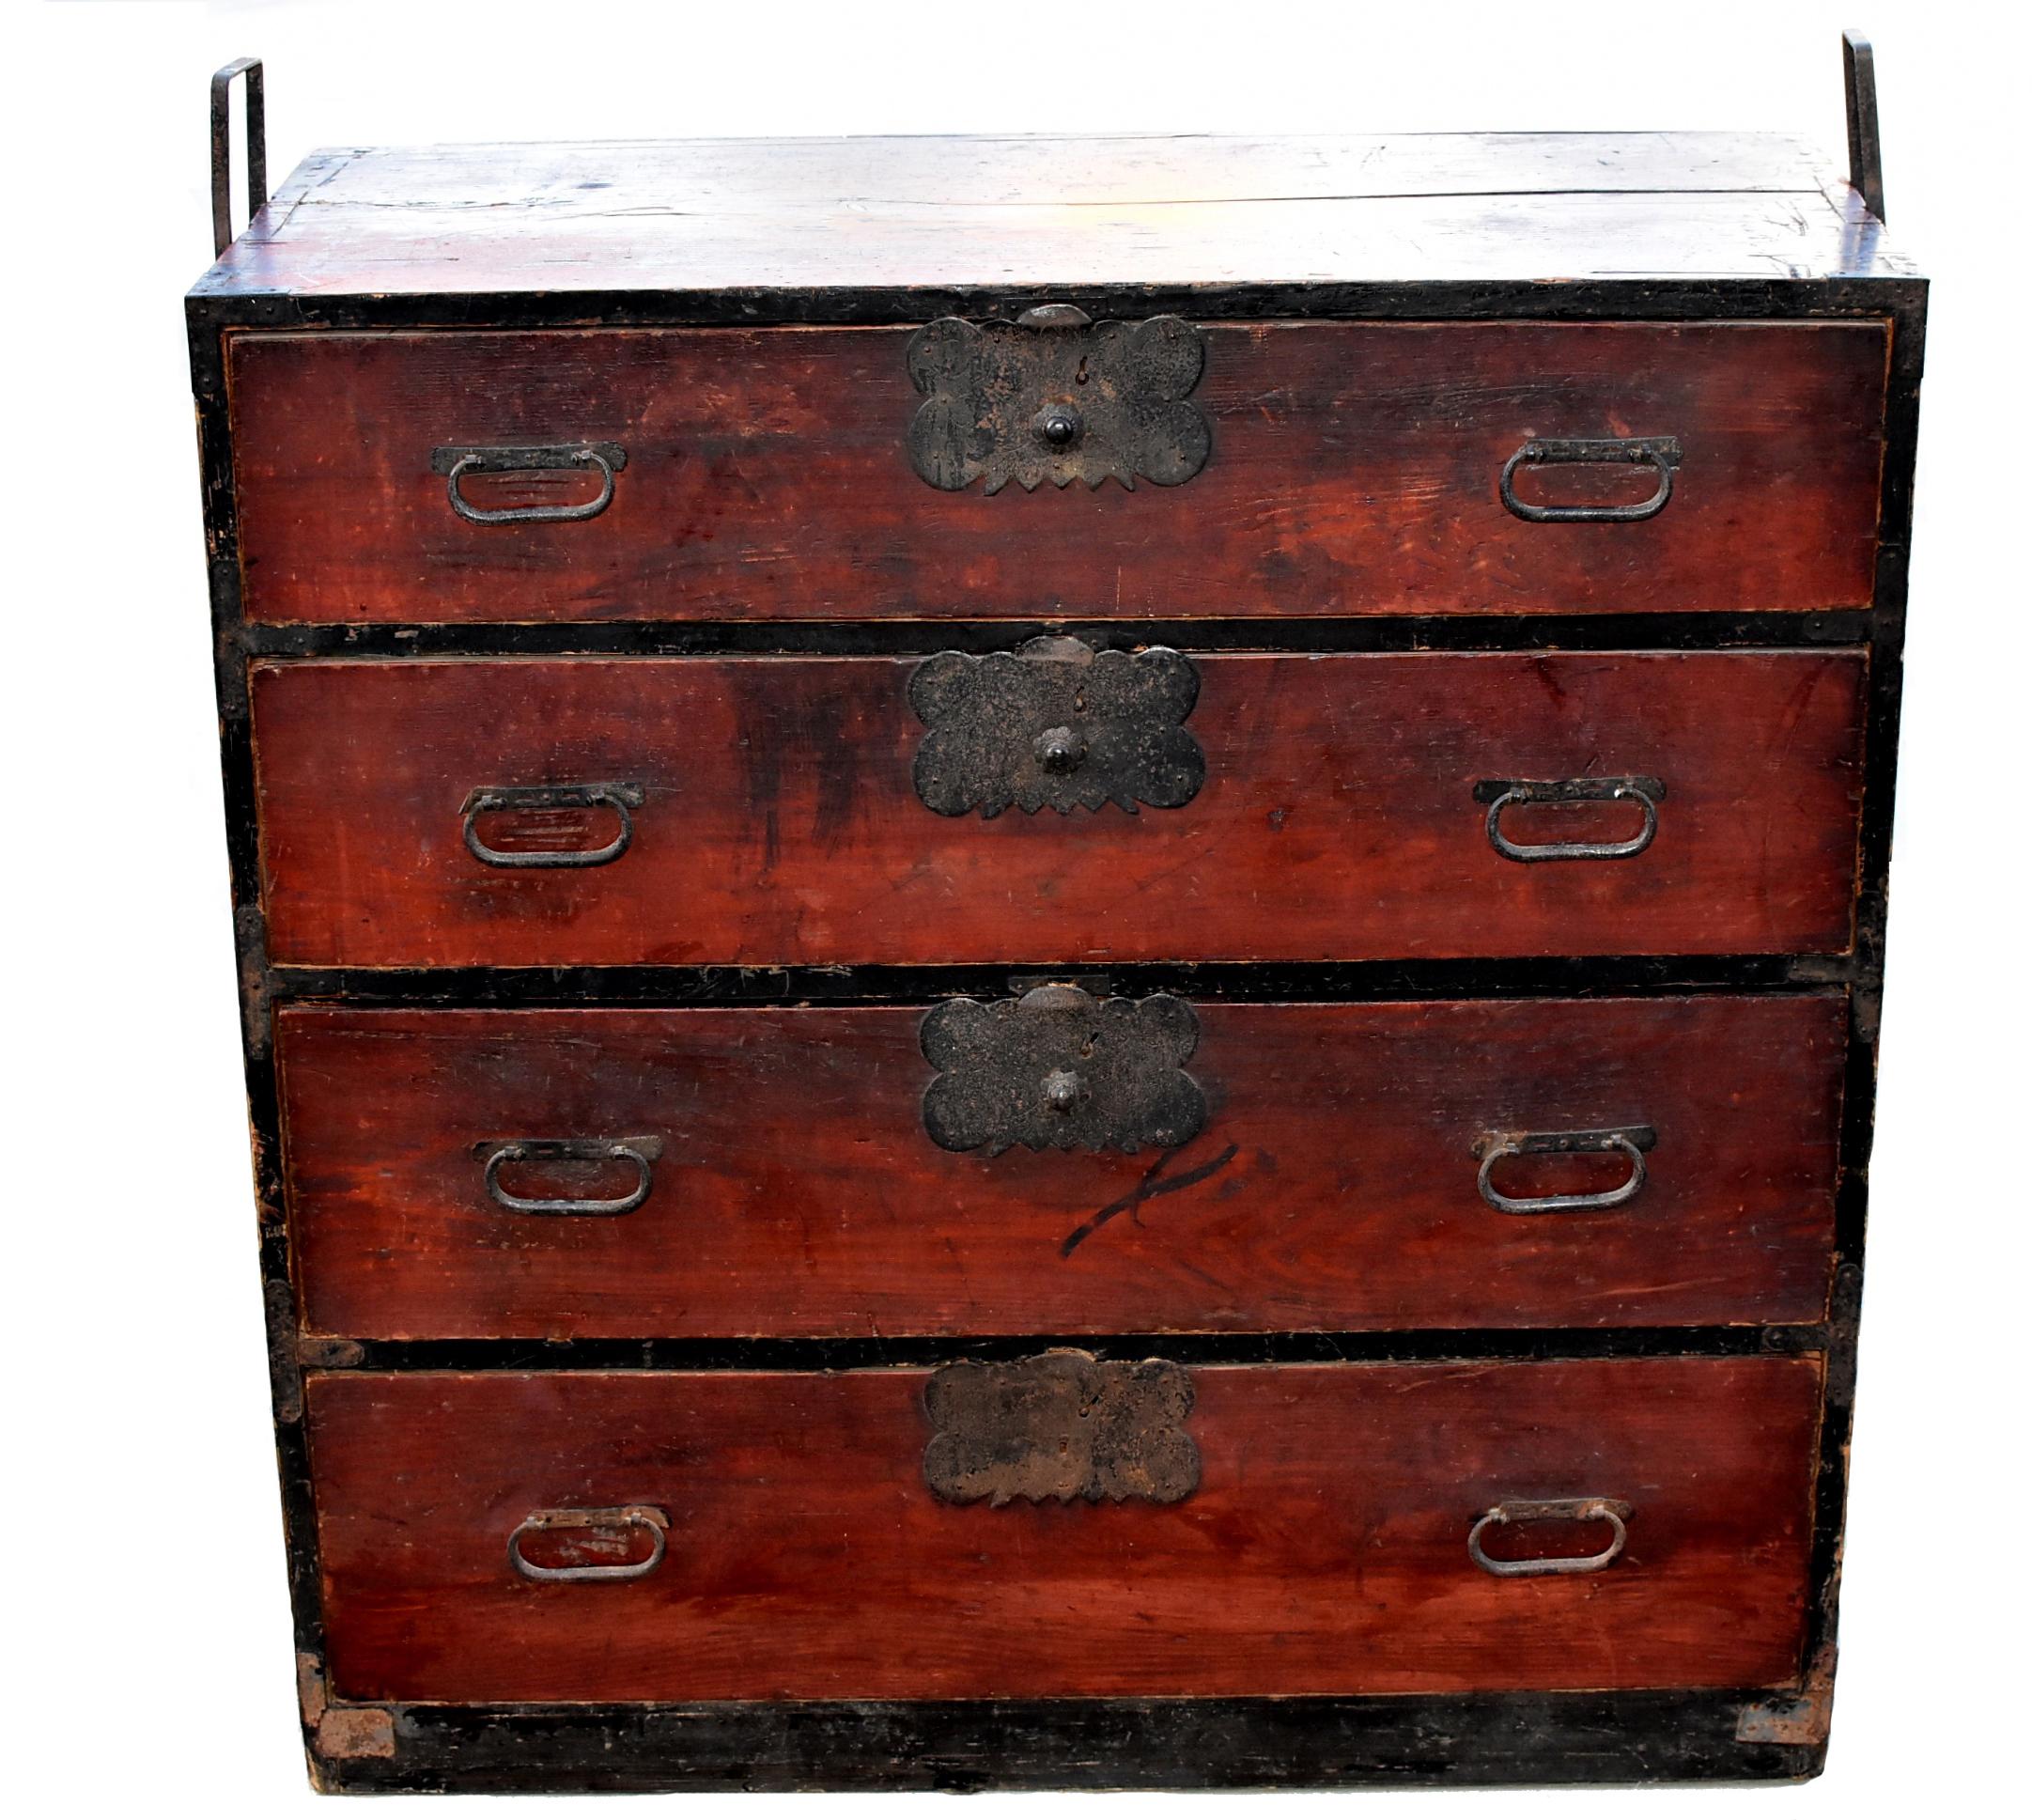 A beautiful antique, Meiji period, Japanese Tansu with four large full capacity drawers. Unique, solid iron hardware are all original. Solid wood. Back of the chest has Japanese ink brush calligraphy. All our antique furniture are touched up and